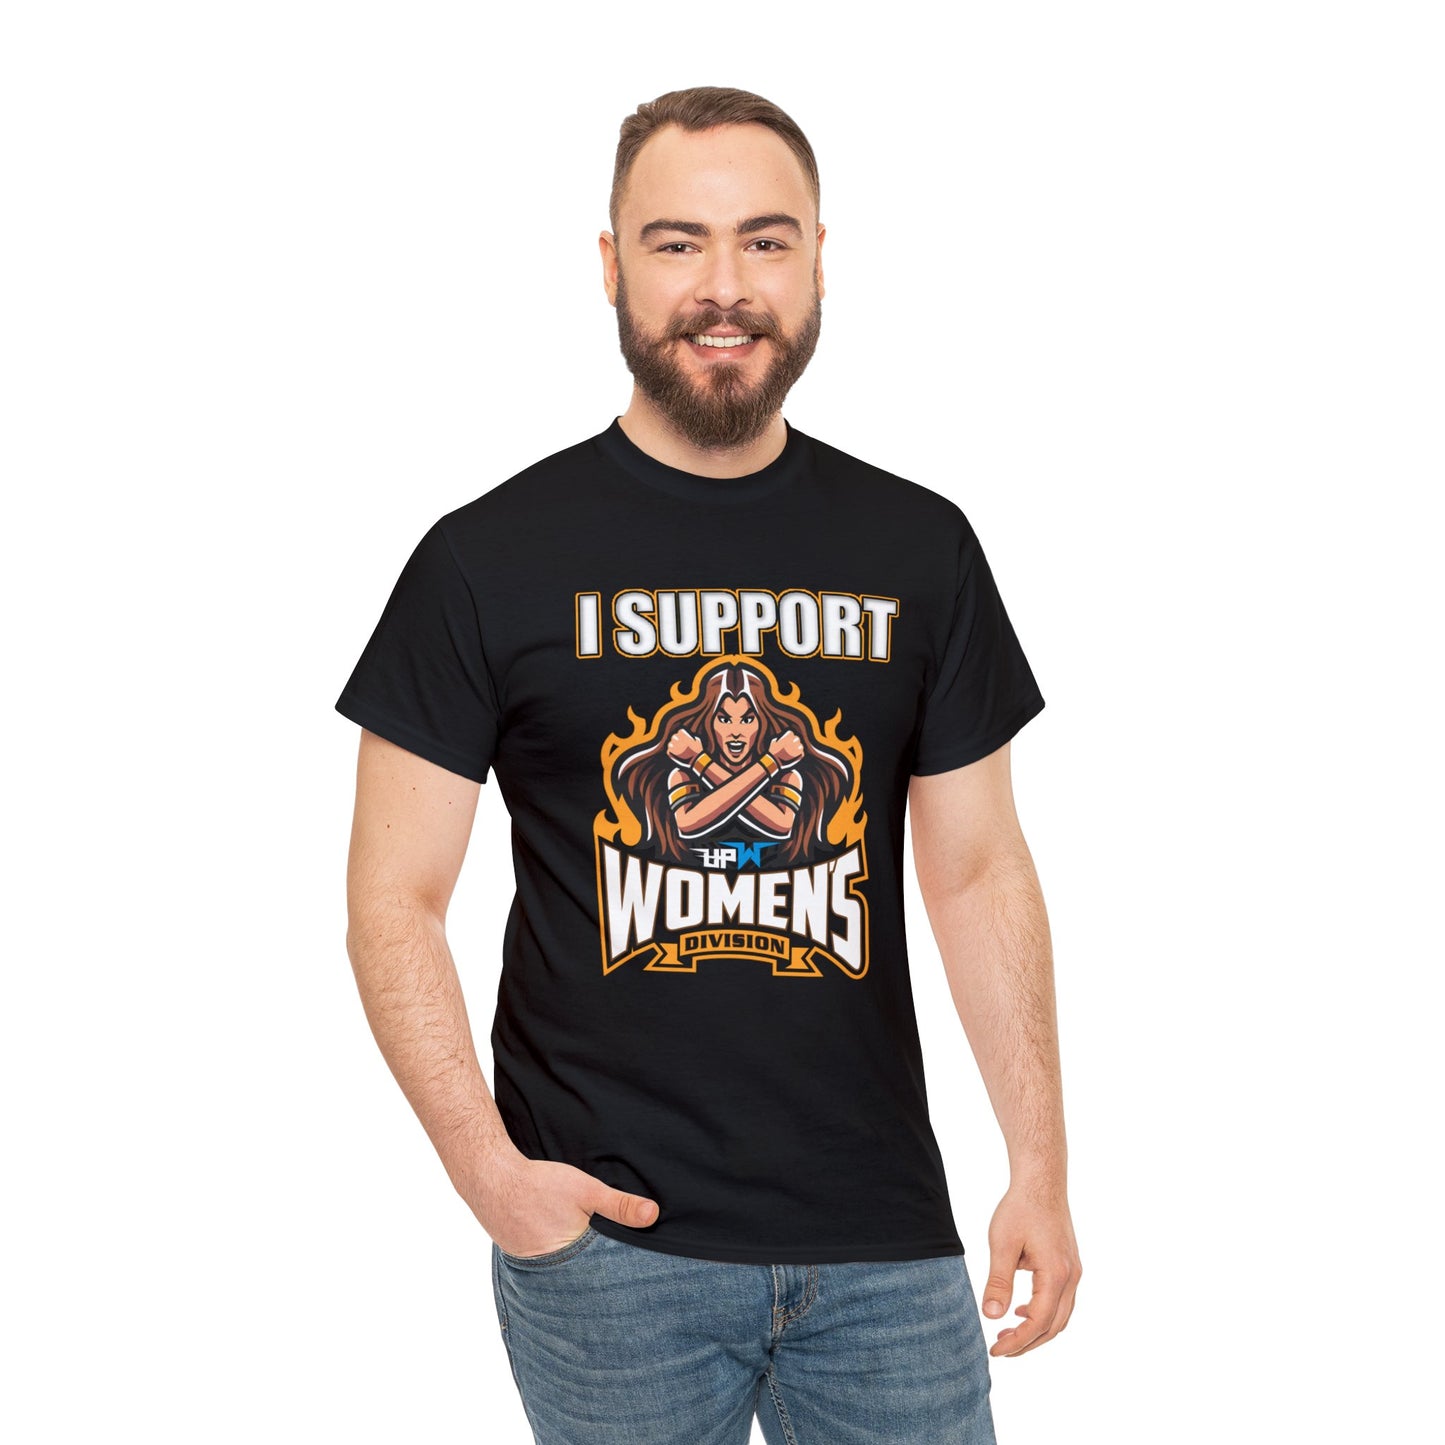 I SUPPORT UPW WOMENS DIVISION PRINTED TEE